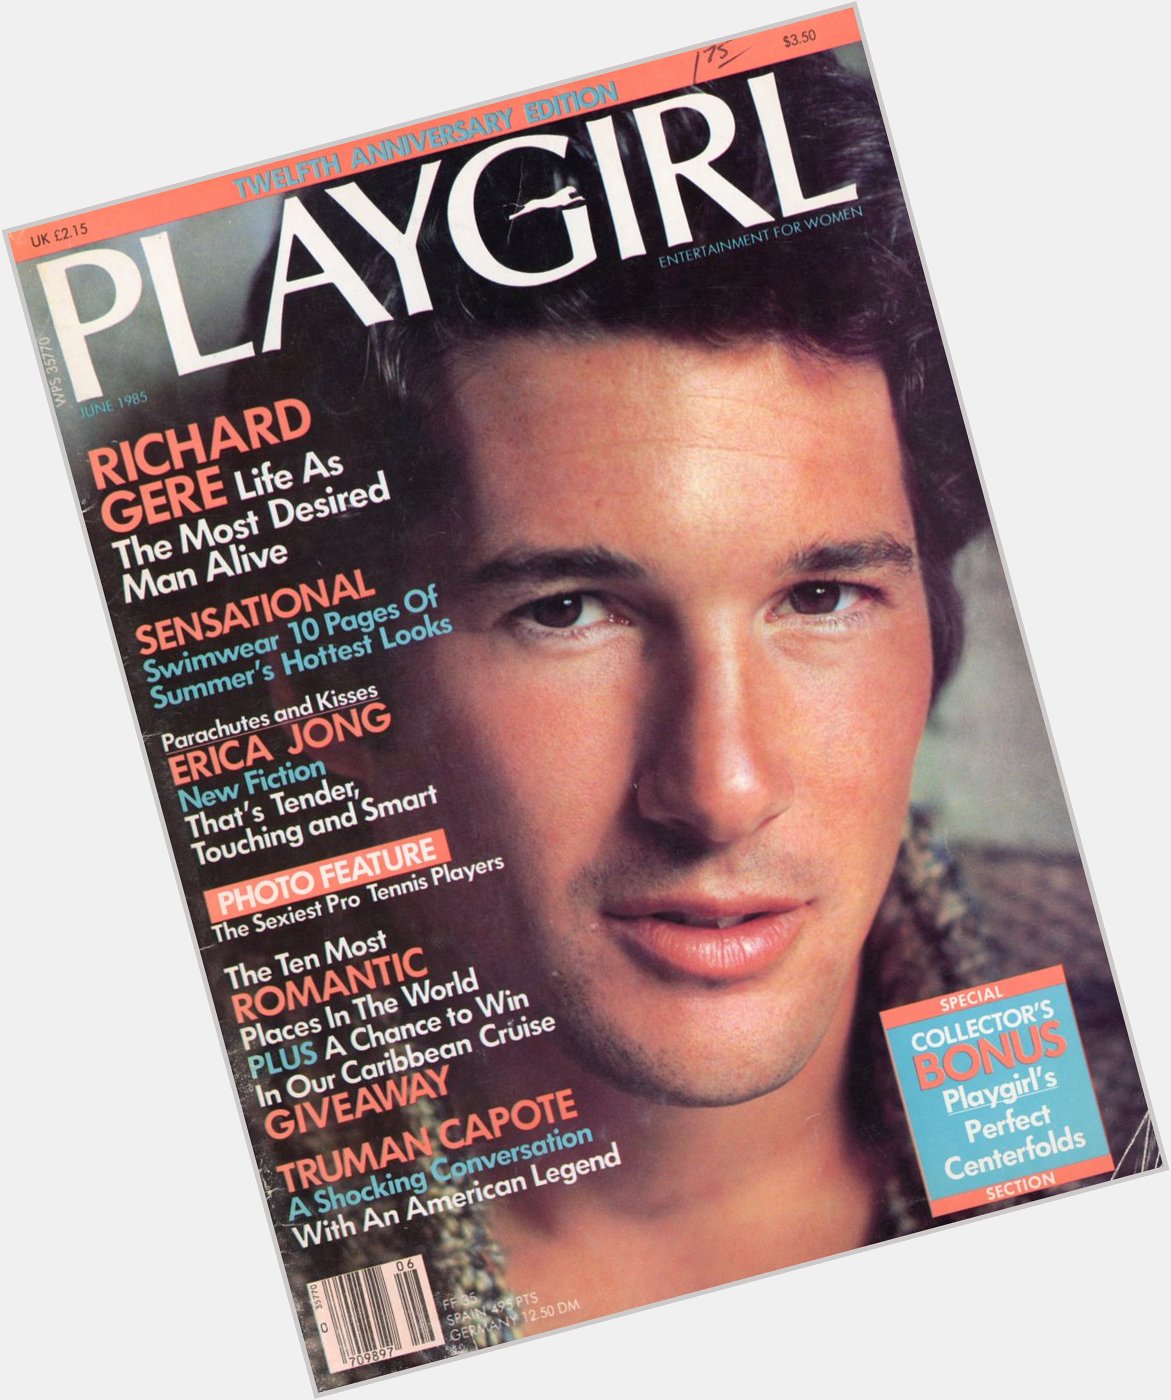 Happy birthday RICHARD GERE (here in the iconic cover photo by ) 